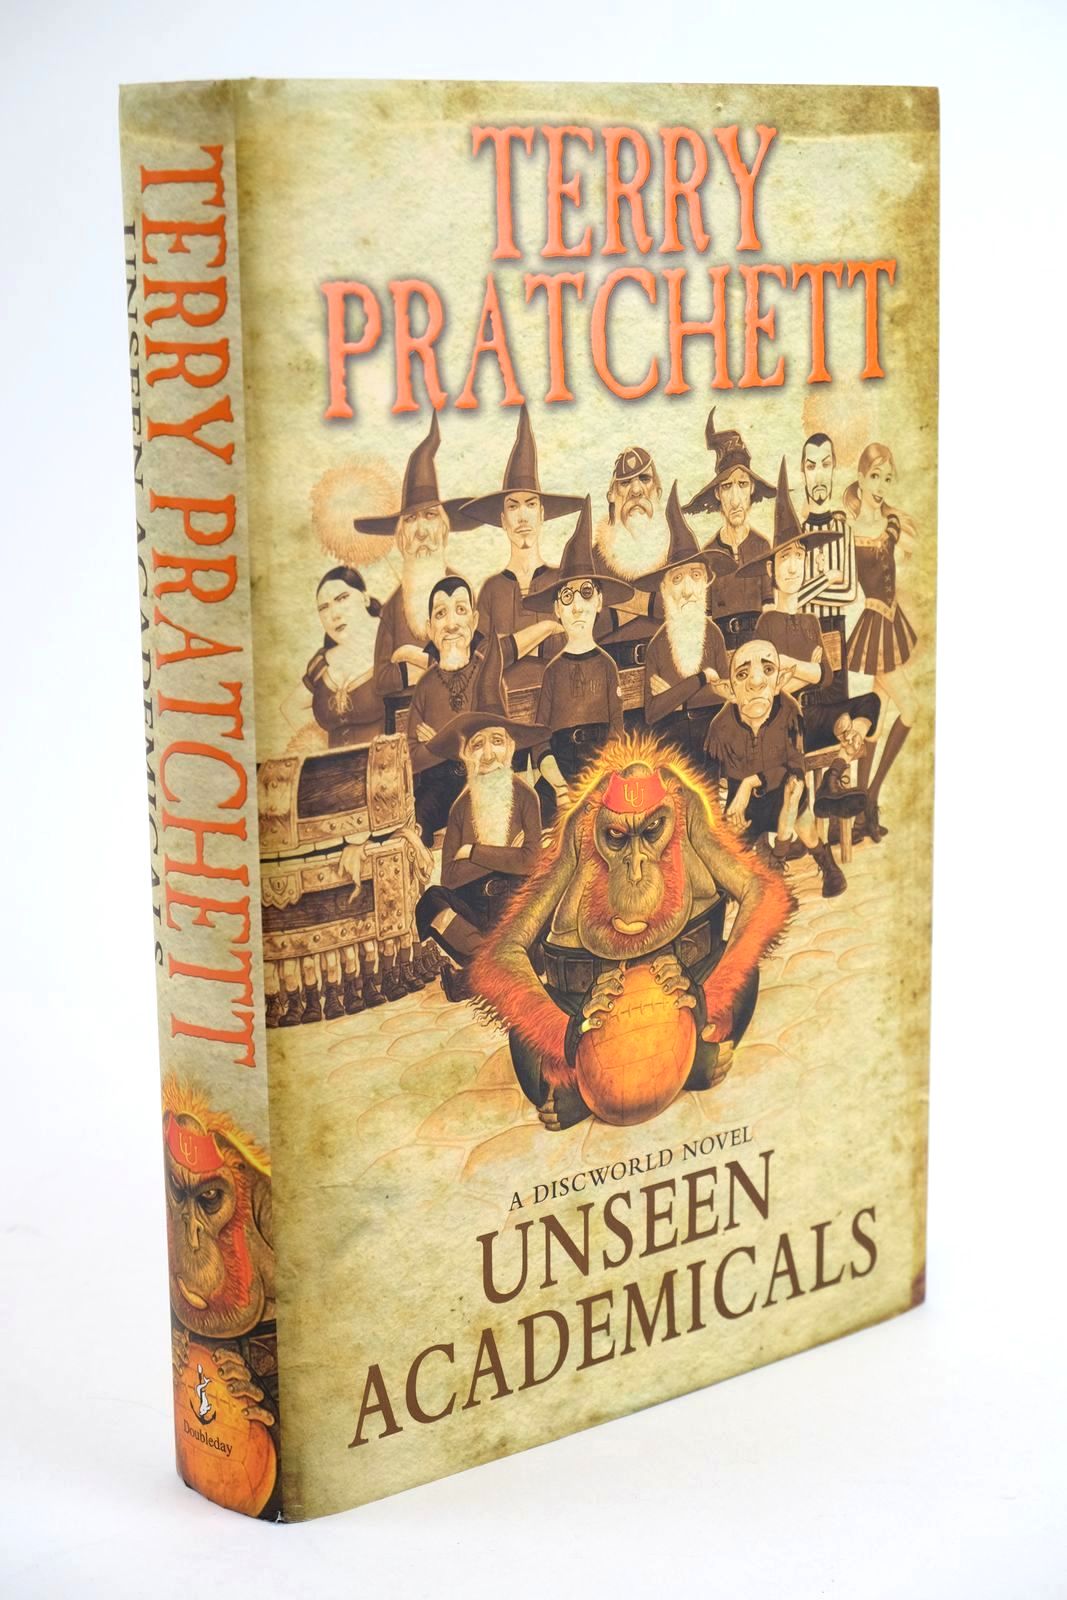 Photo of UNSEEN ACADEMICALS written by Pratchett, Terry published by Doubleday (STOCK CODE: 1323544)  for sale by Stella & Rose's Books